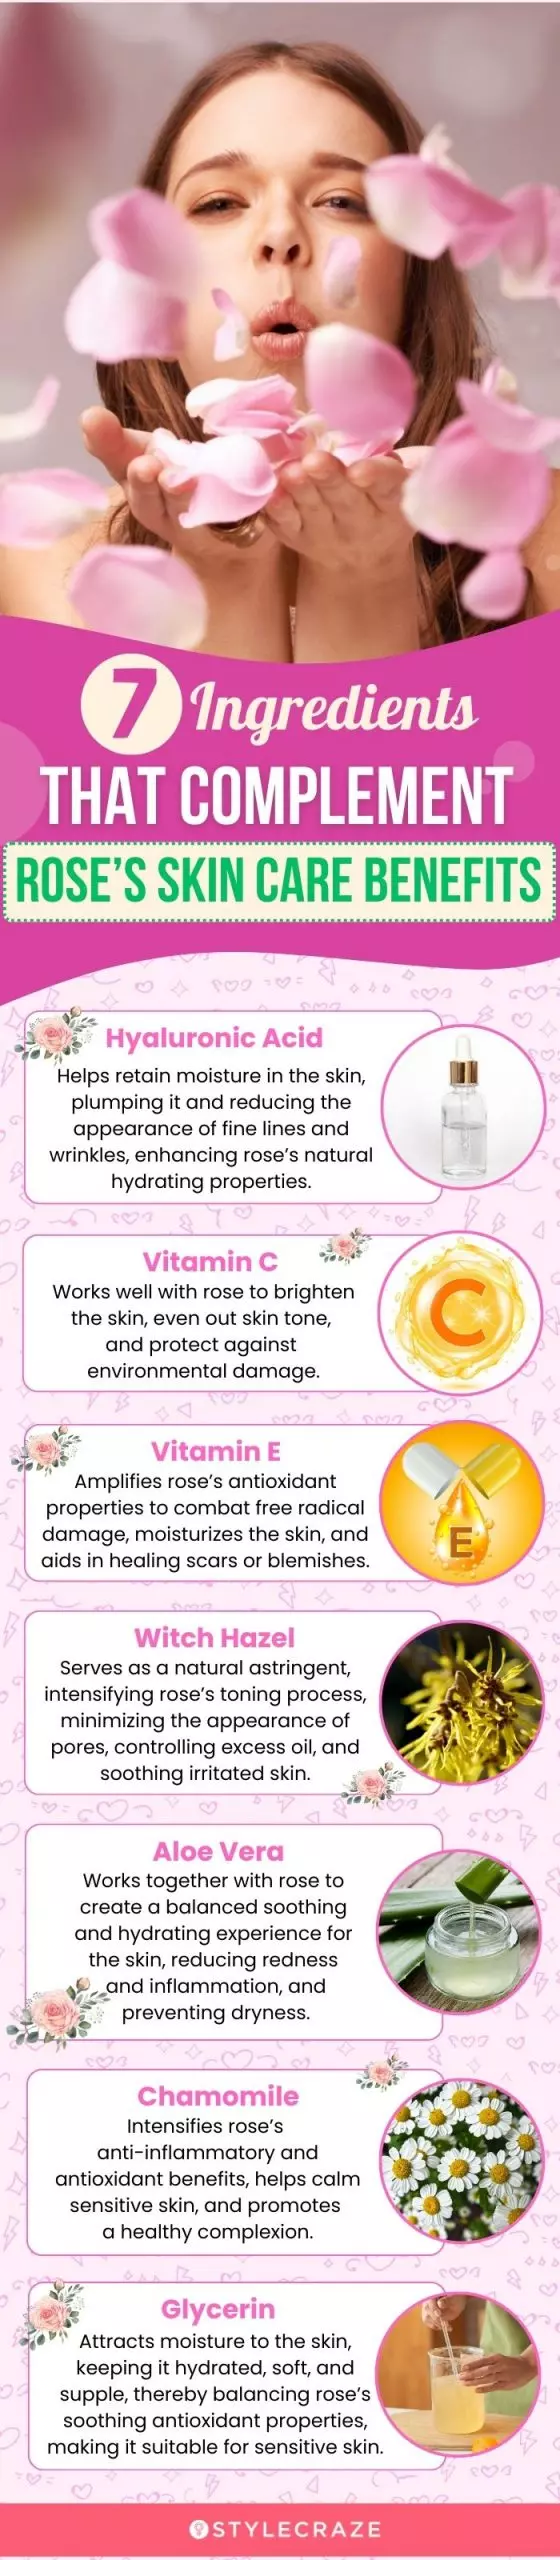 7 Ingredients That Complement Rose’s Skin Care Benefits (infographic)